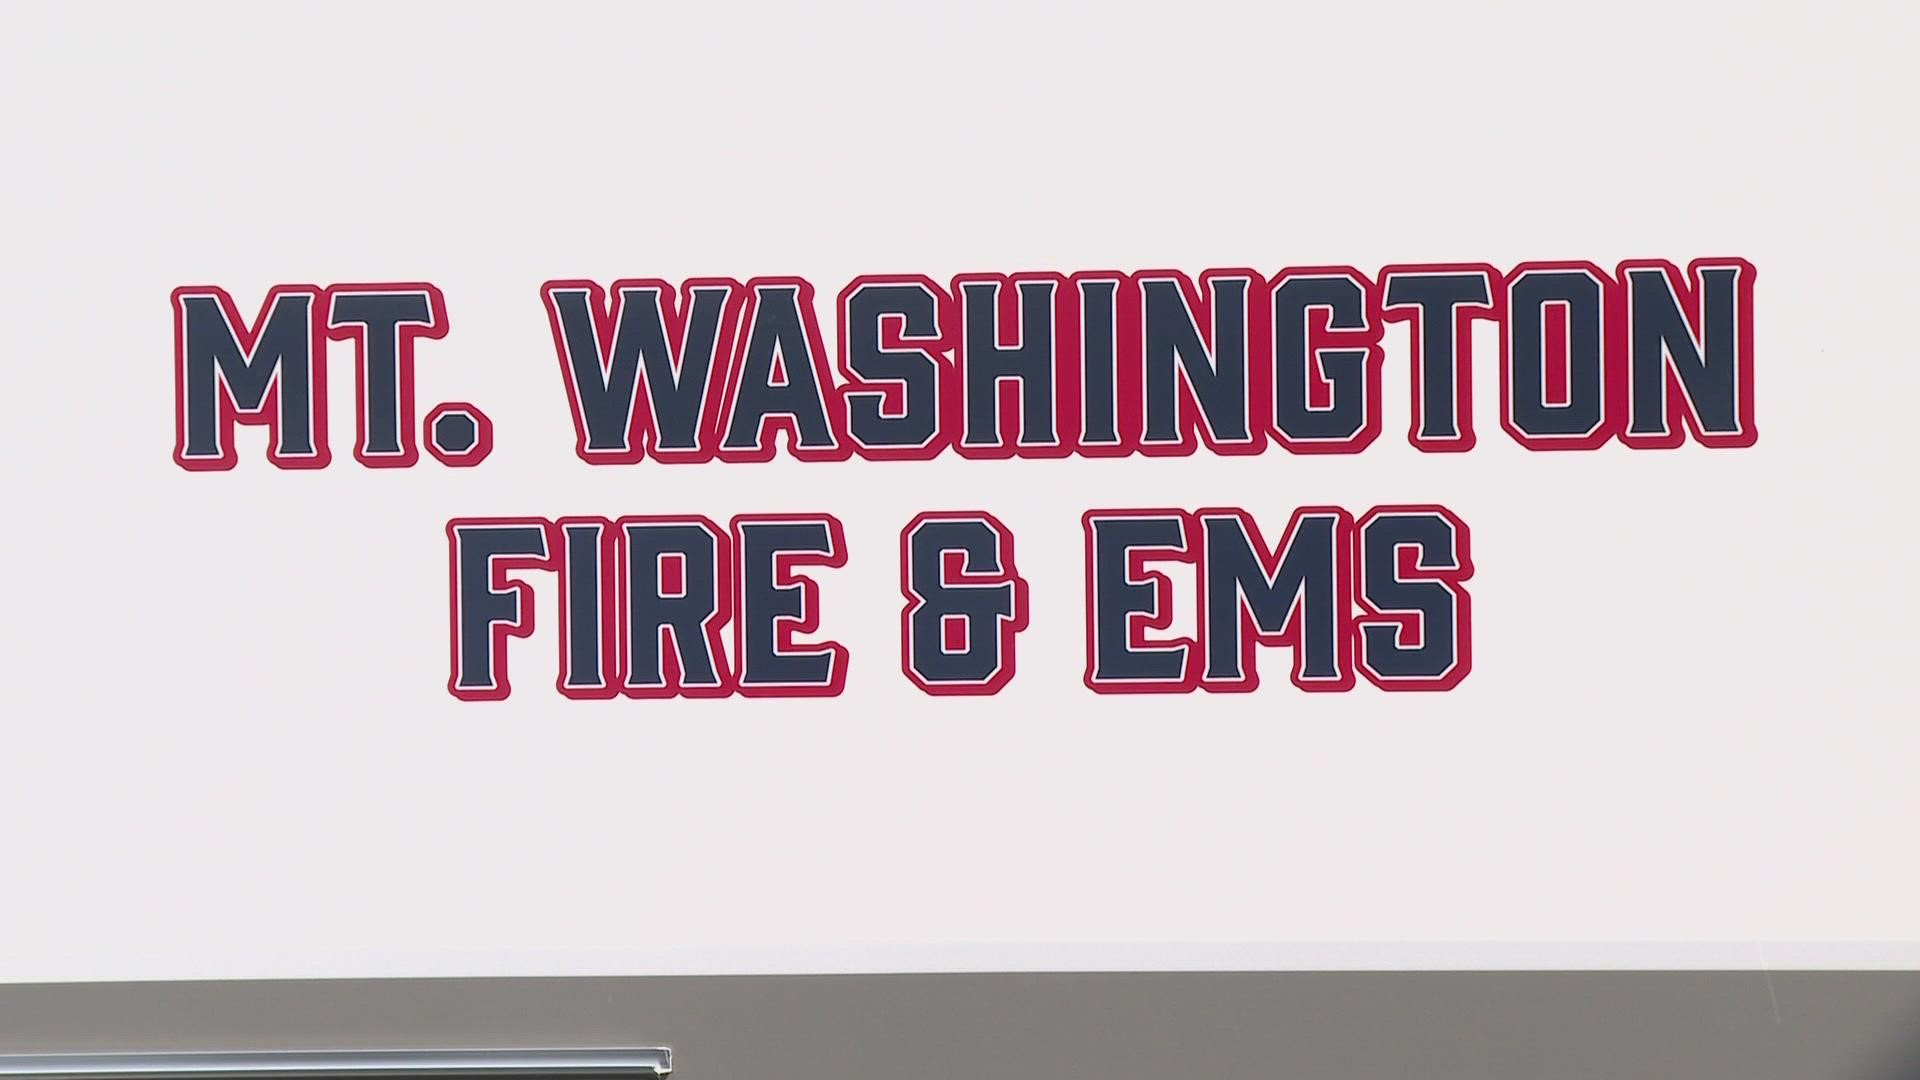 The increase will pay for a new EMS service in the Mt. Washington Fire District. Some say it's necessary while others see it as just another new expense.